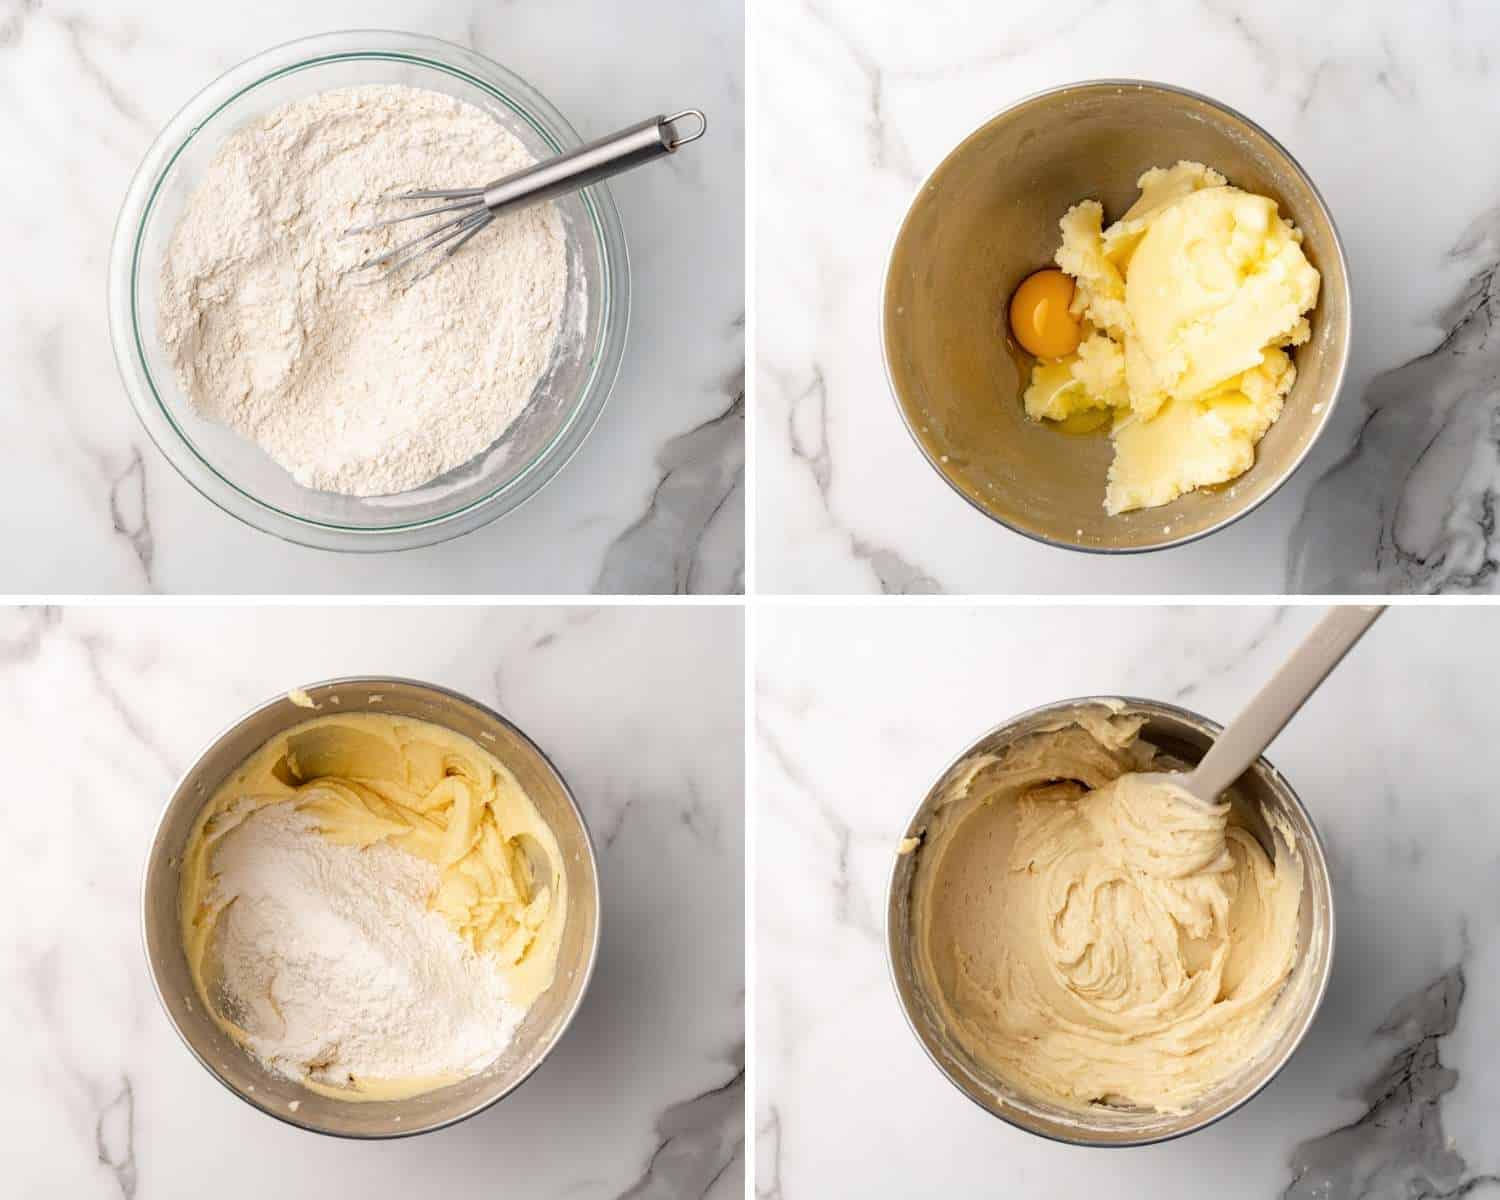 Four photos showing how to make a vanilla sponge cake from scratch